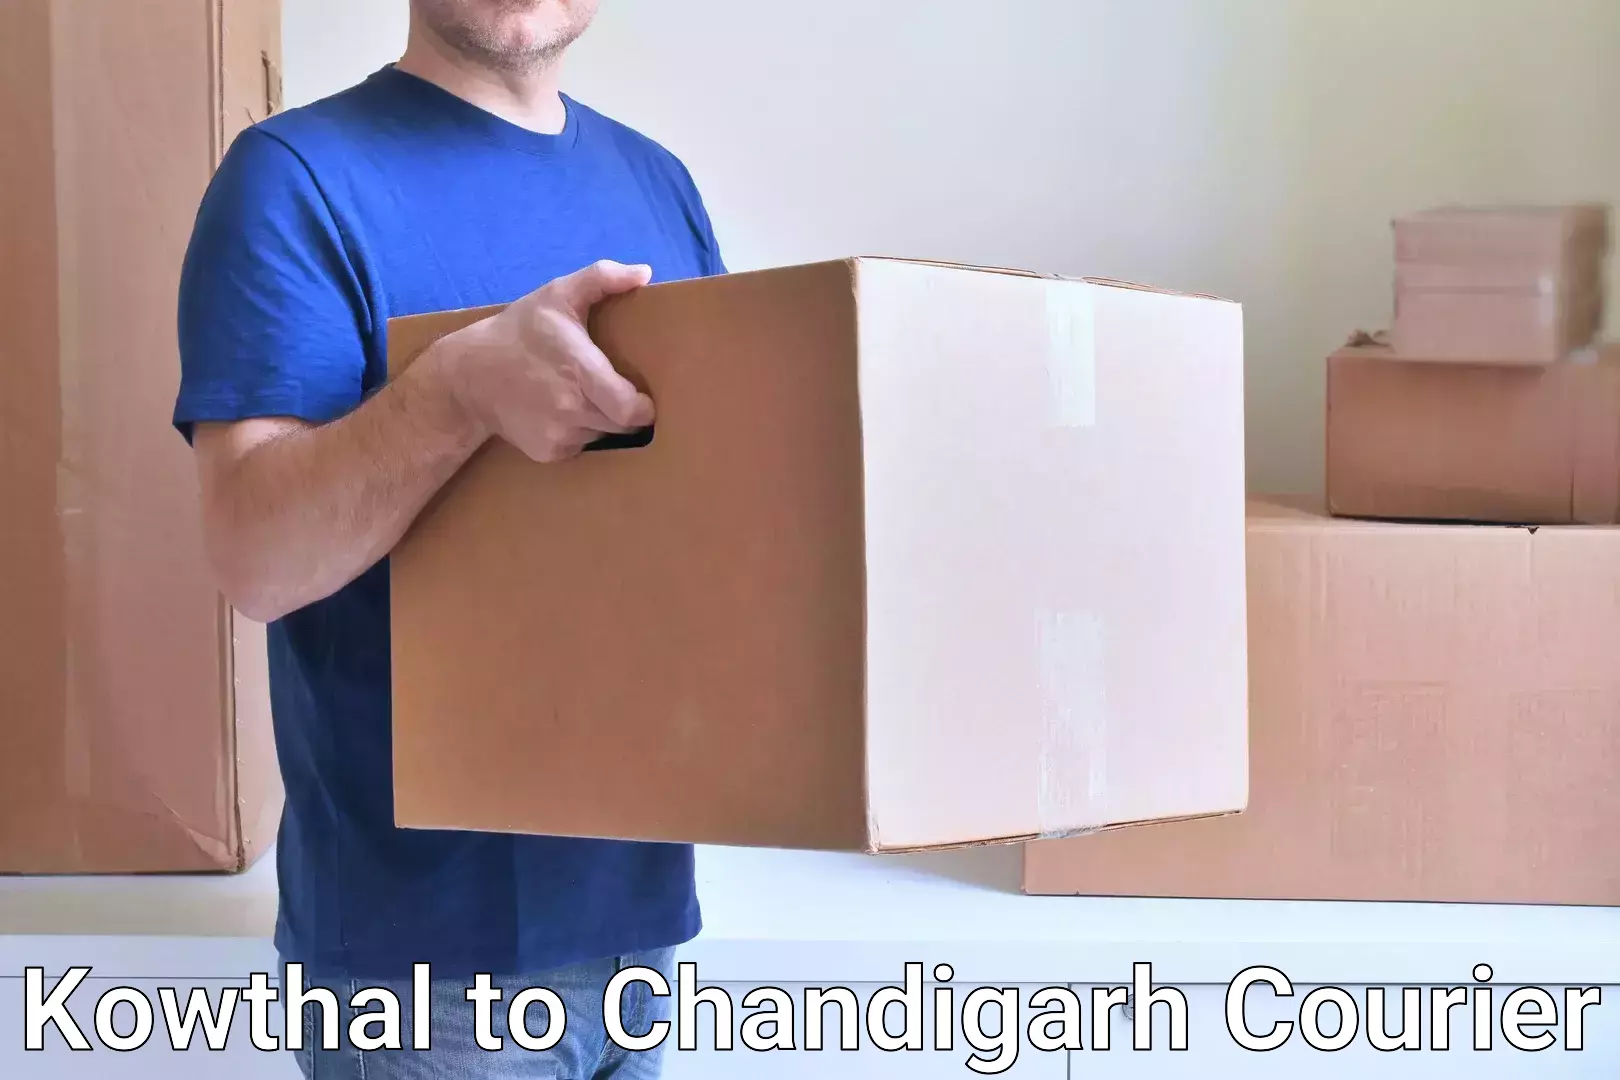 On-call courier service Kowthal to Chandigarh